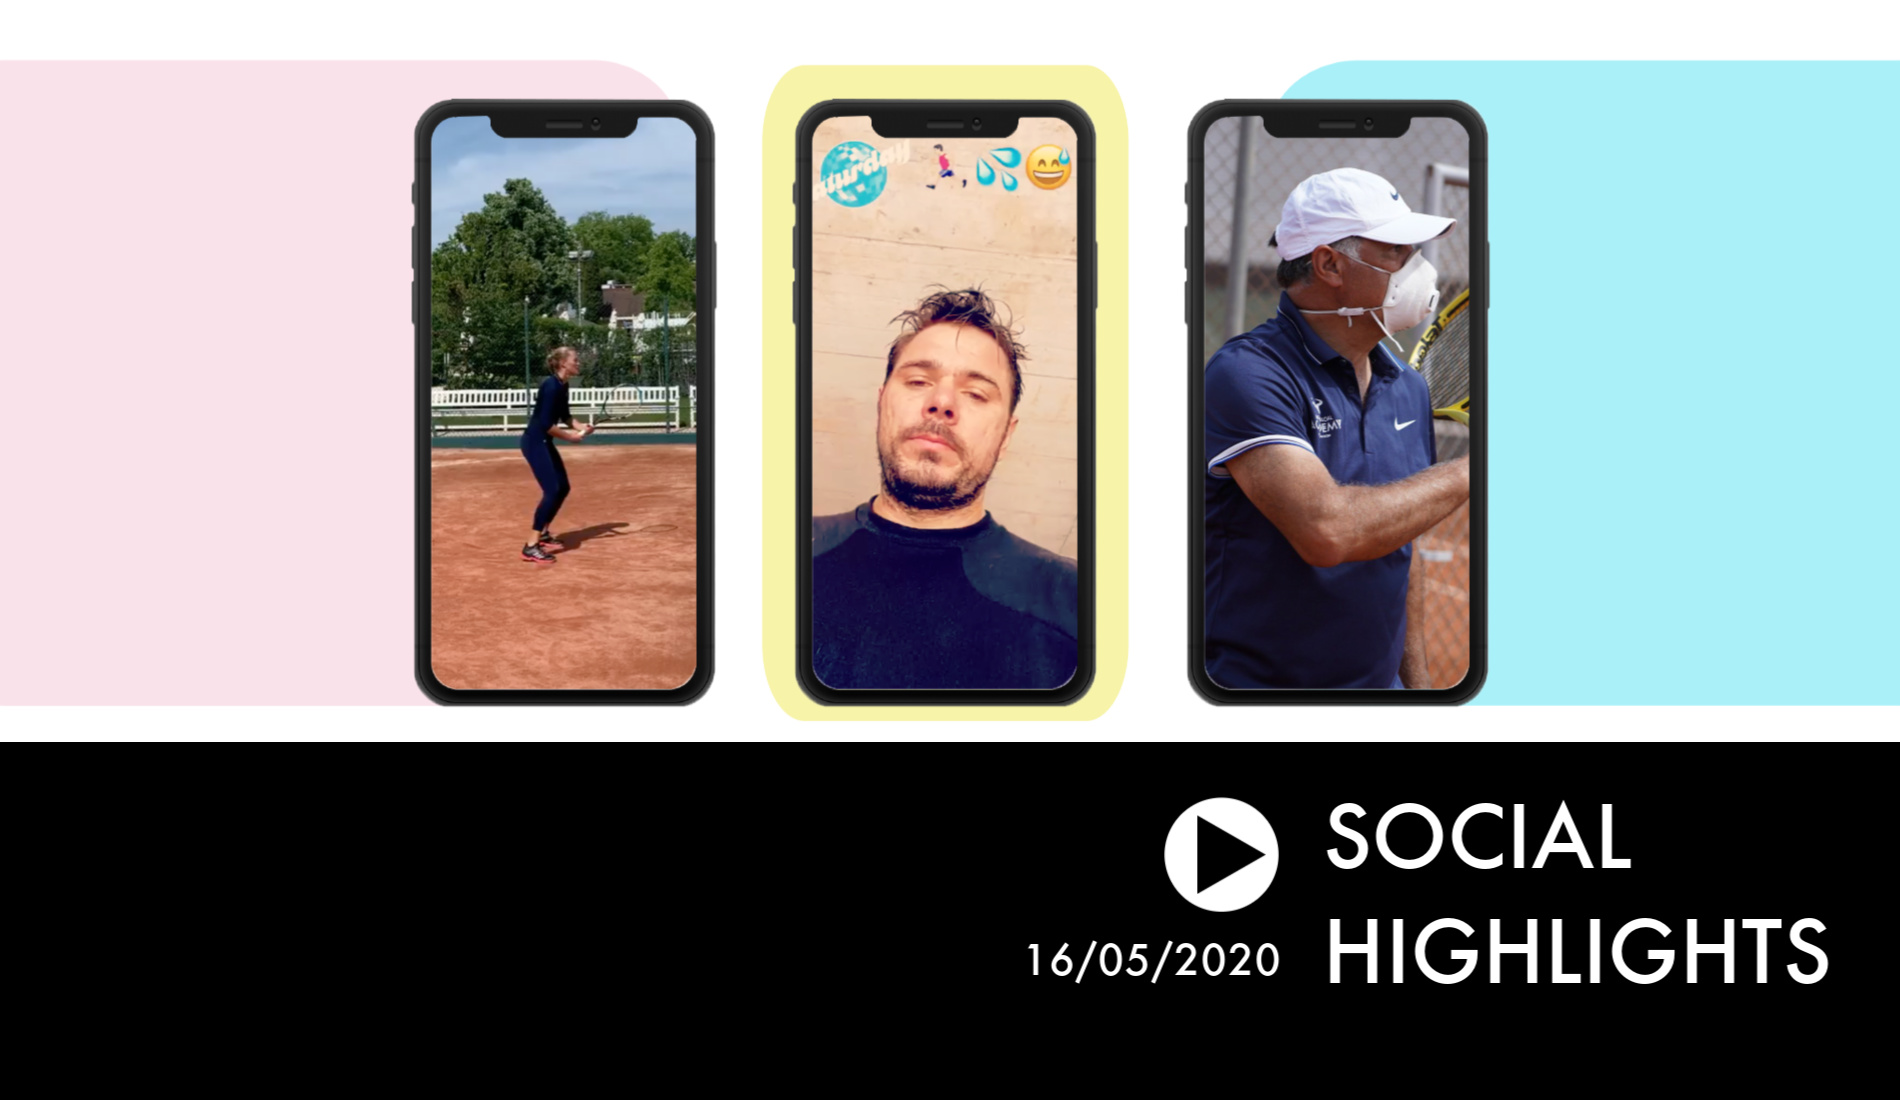 Social Highlights - Players are back on court